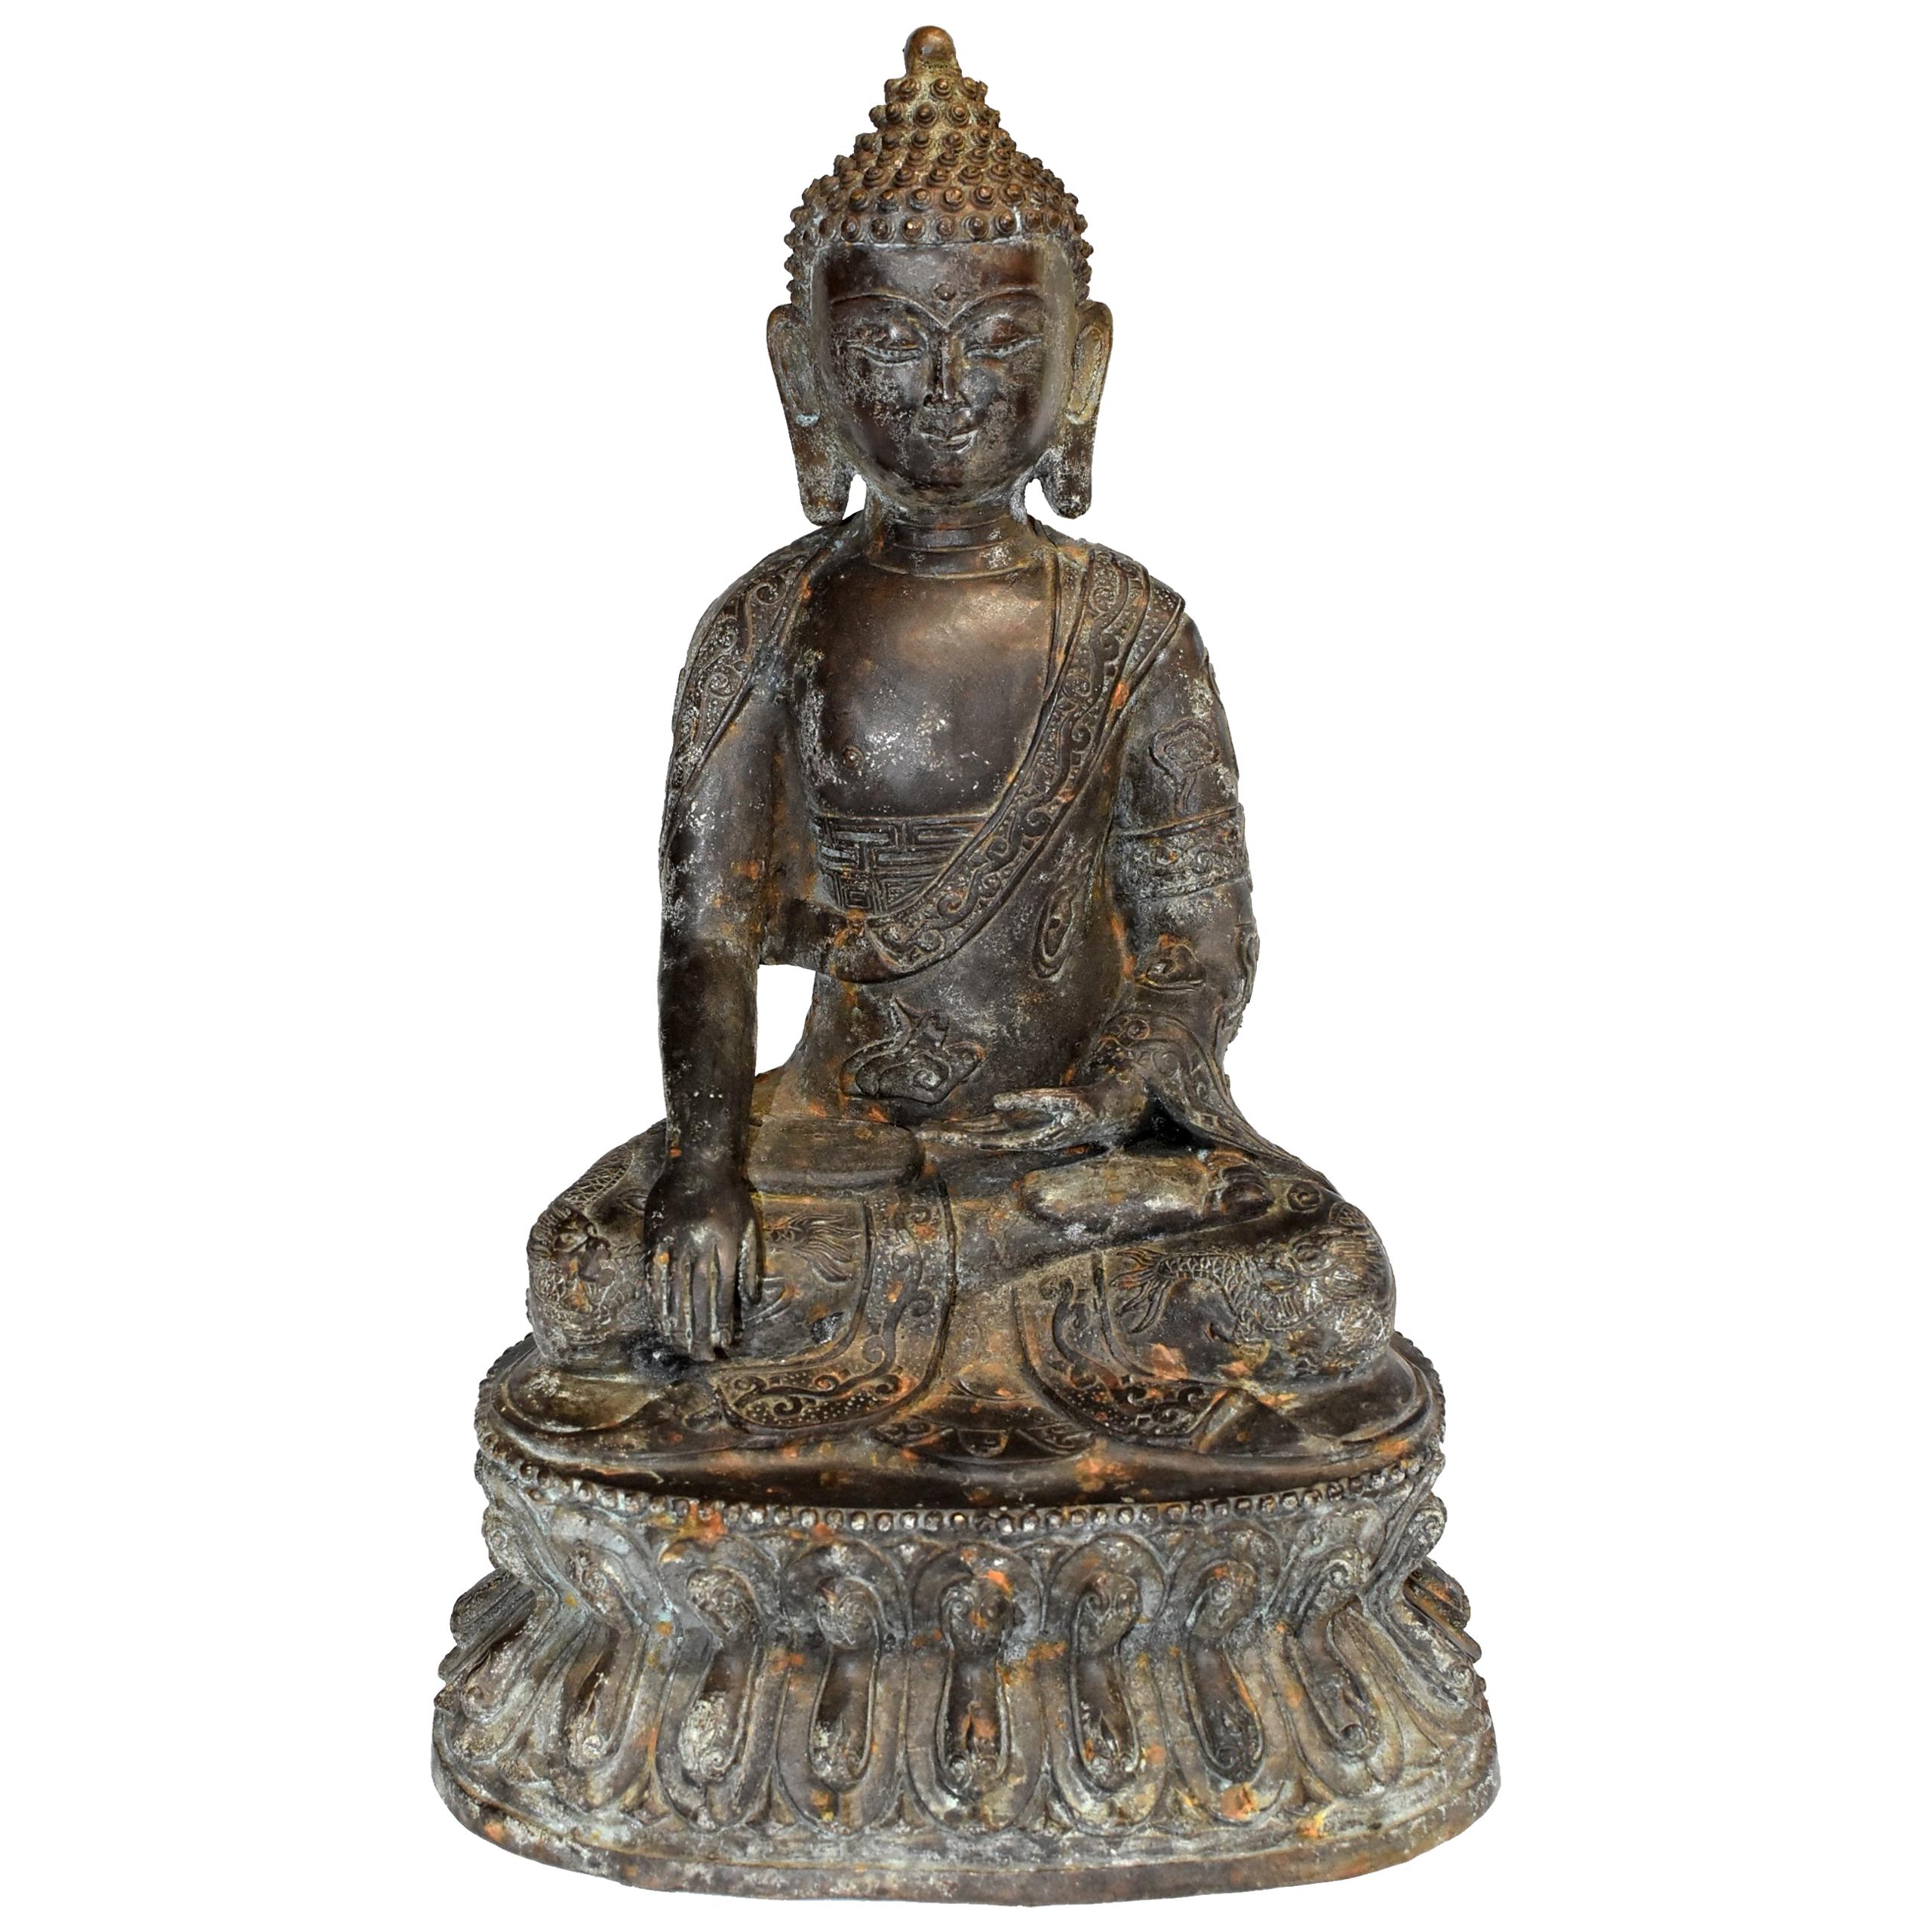 Antique Bronze Buddha, Charity and Compassion